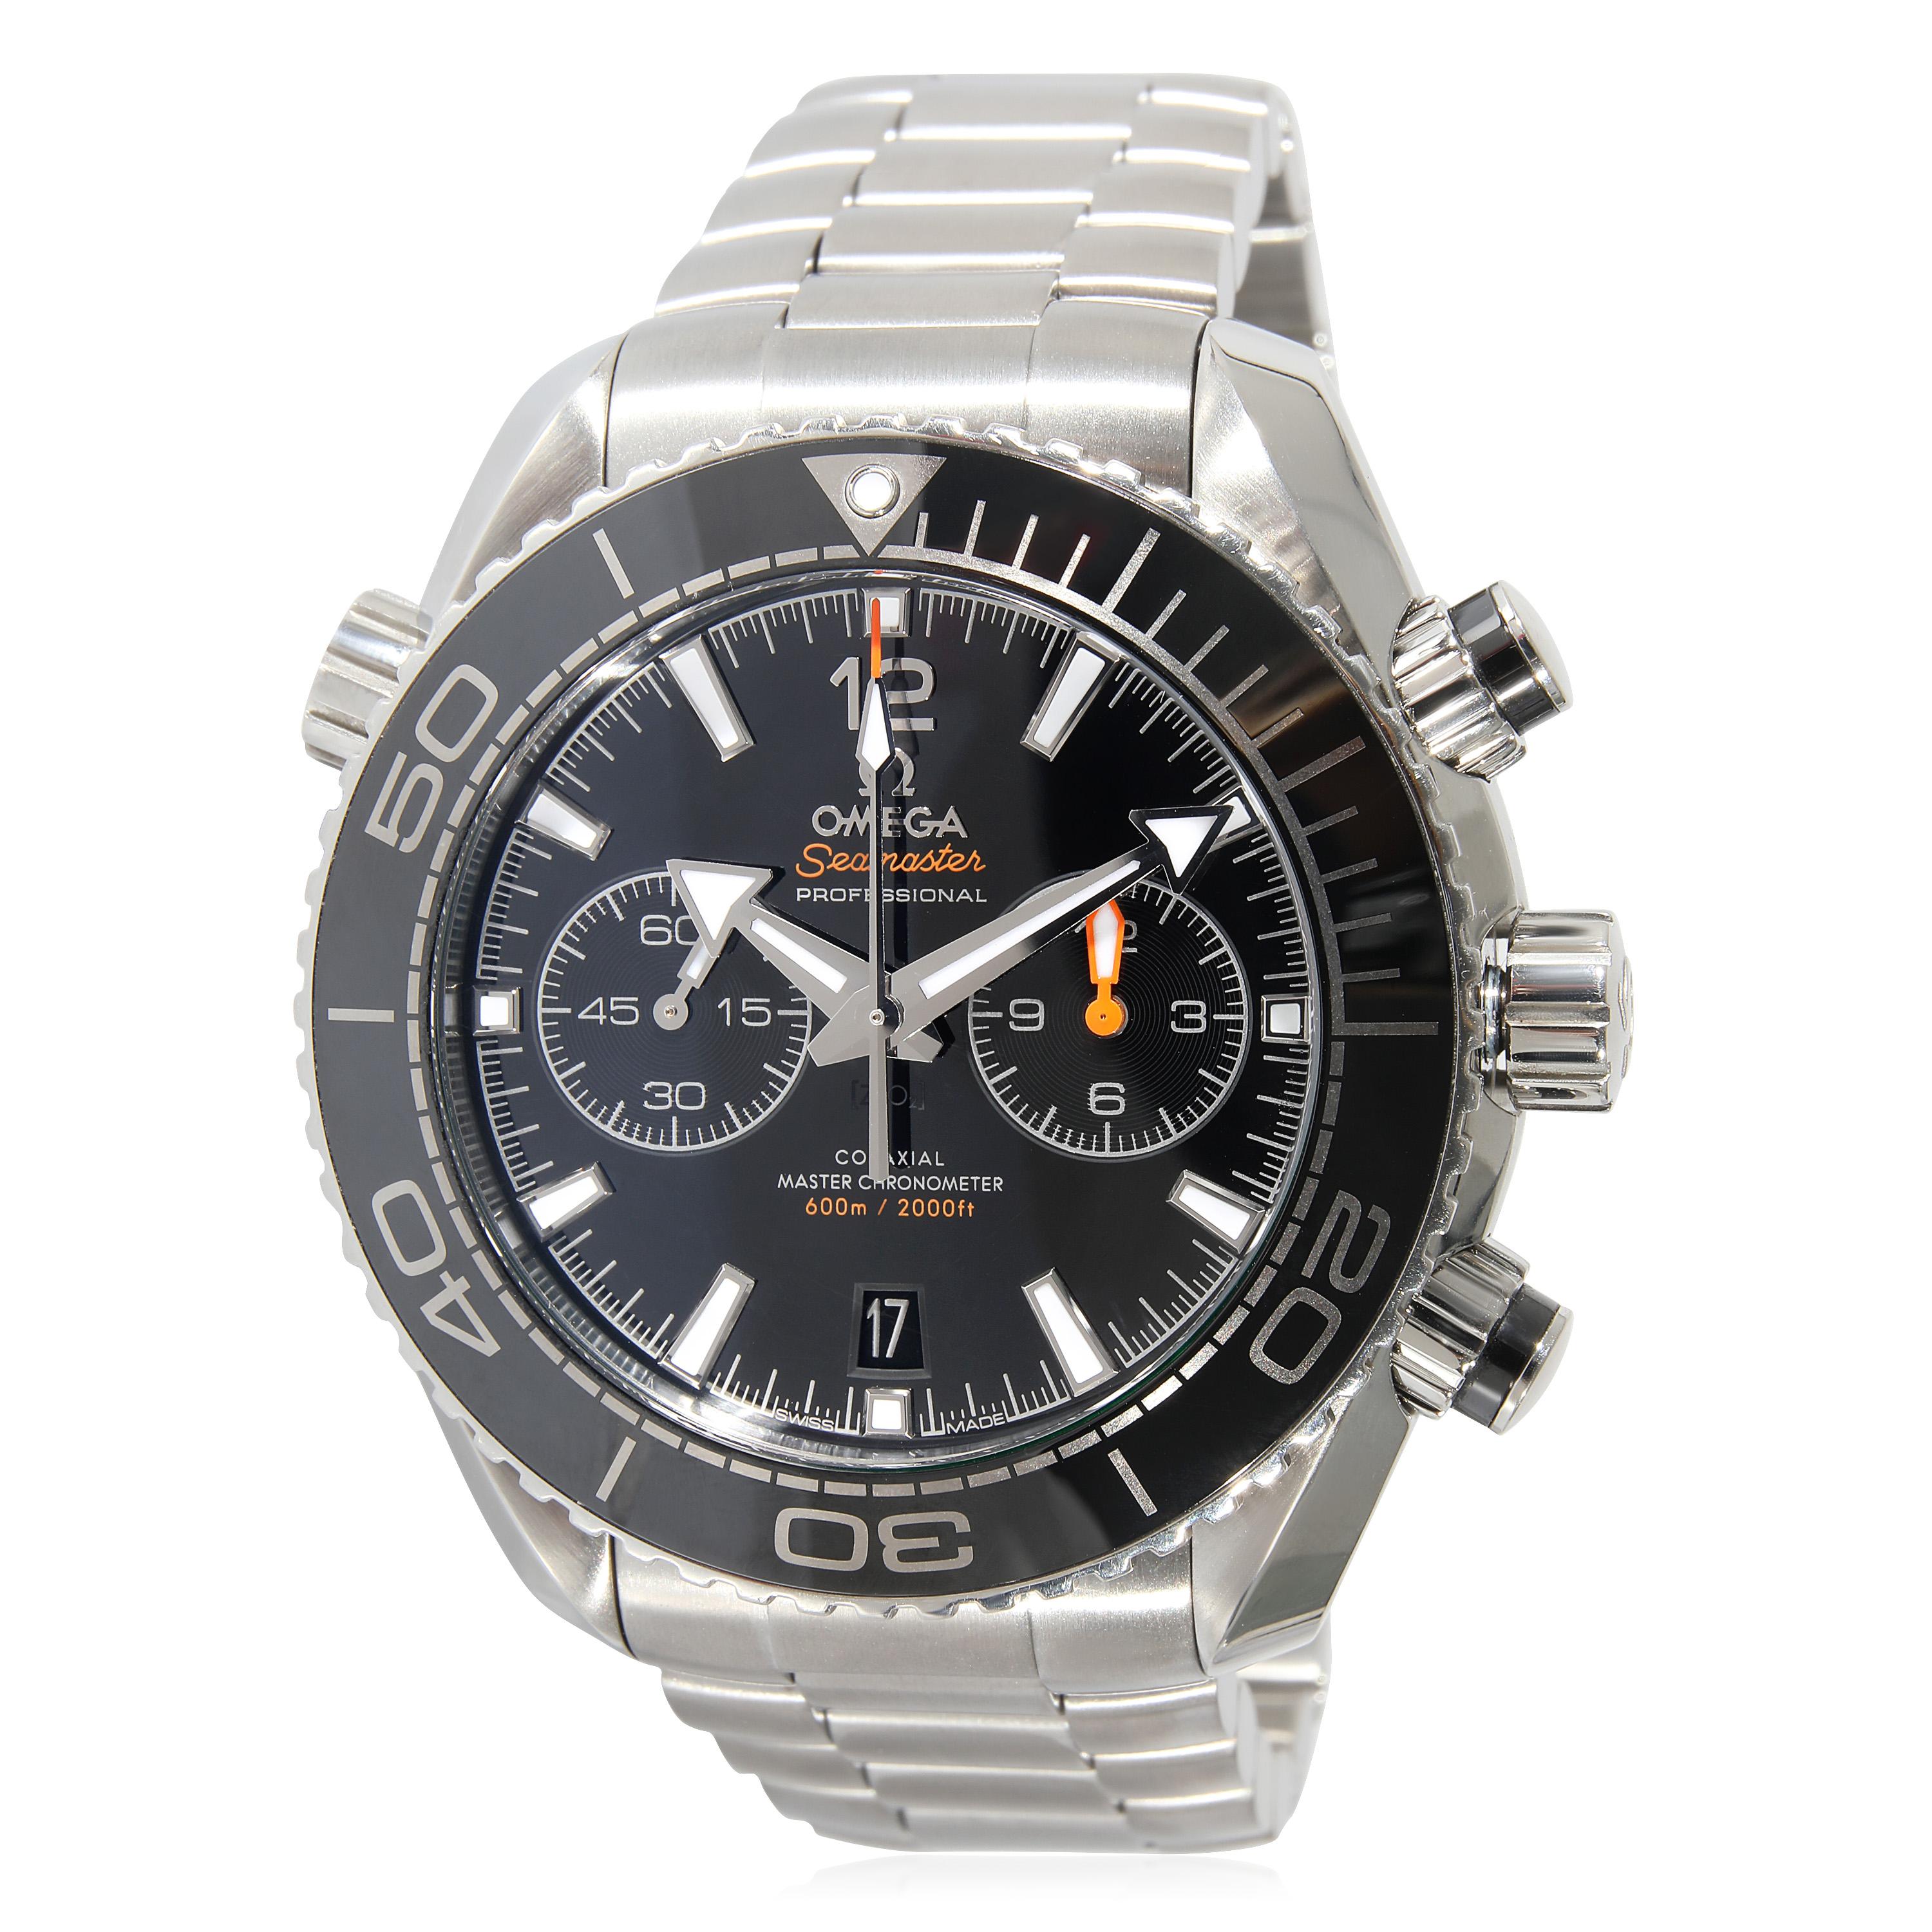 Omega Seamaster Planet Ocean Diver 215.30.46.51.01.001 Men's Watch in  Stainless

SKU: 132302

PRIMARY DETAILS
Brand: Omega
Model: Seamaster Planet Ocean Diver
Country of Origin: Switzerland
Movement Type: Mechanical: Automatic/Kinetic
Year